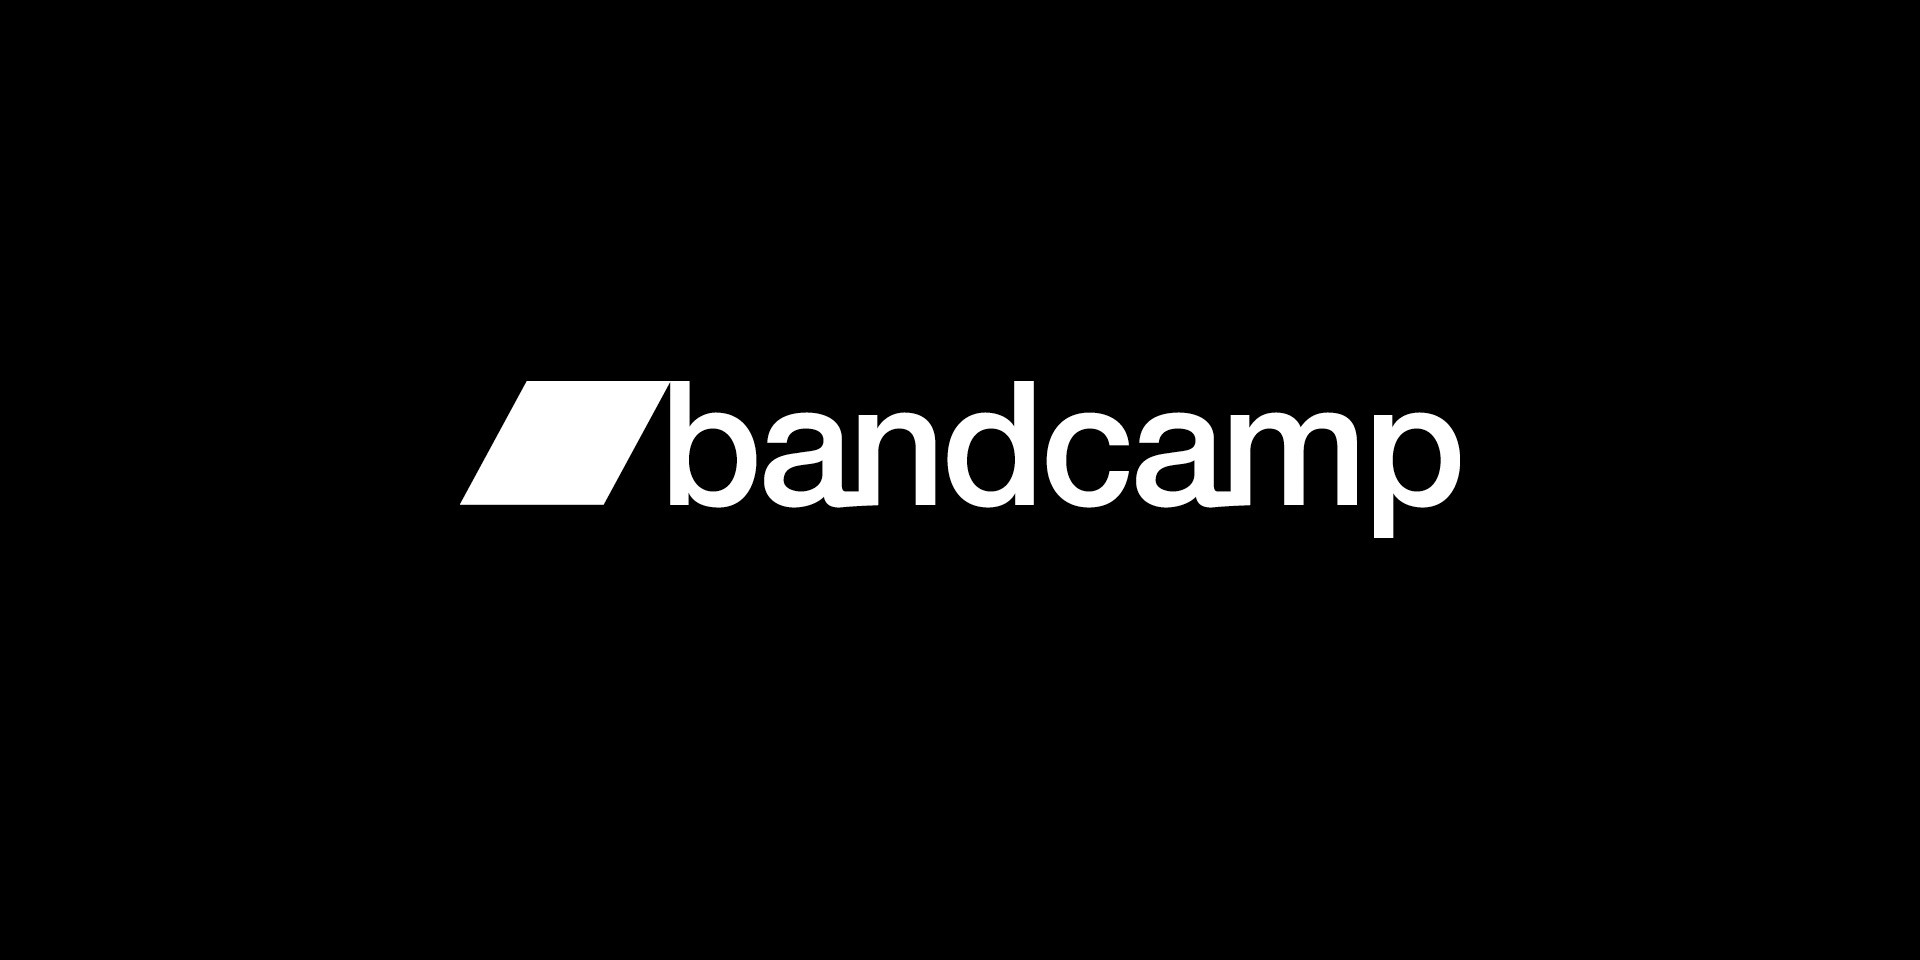 Bandcamp to give all proceeds to artists for 24 hours this Friday